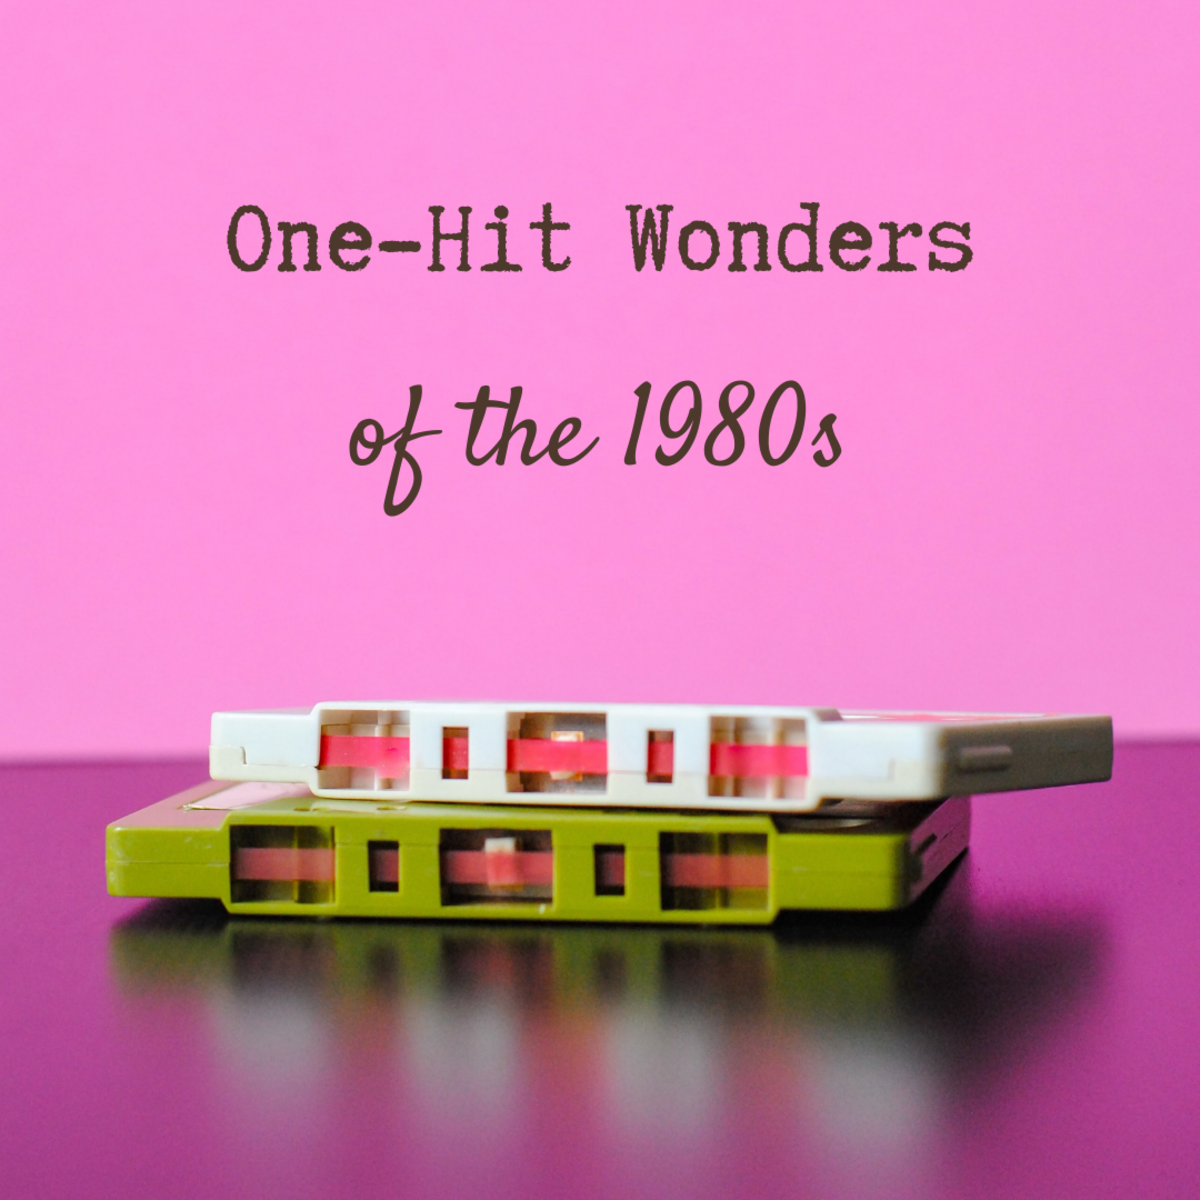 Make a 1980s nostalgia playlist featuring these favorite one-hit wonders from the era.